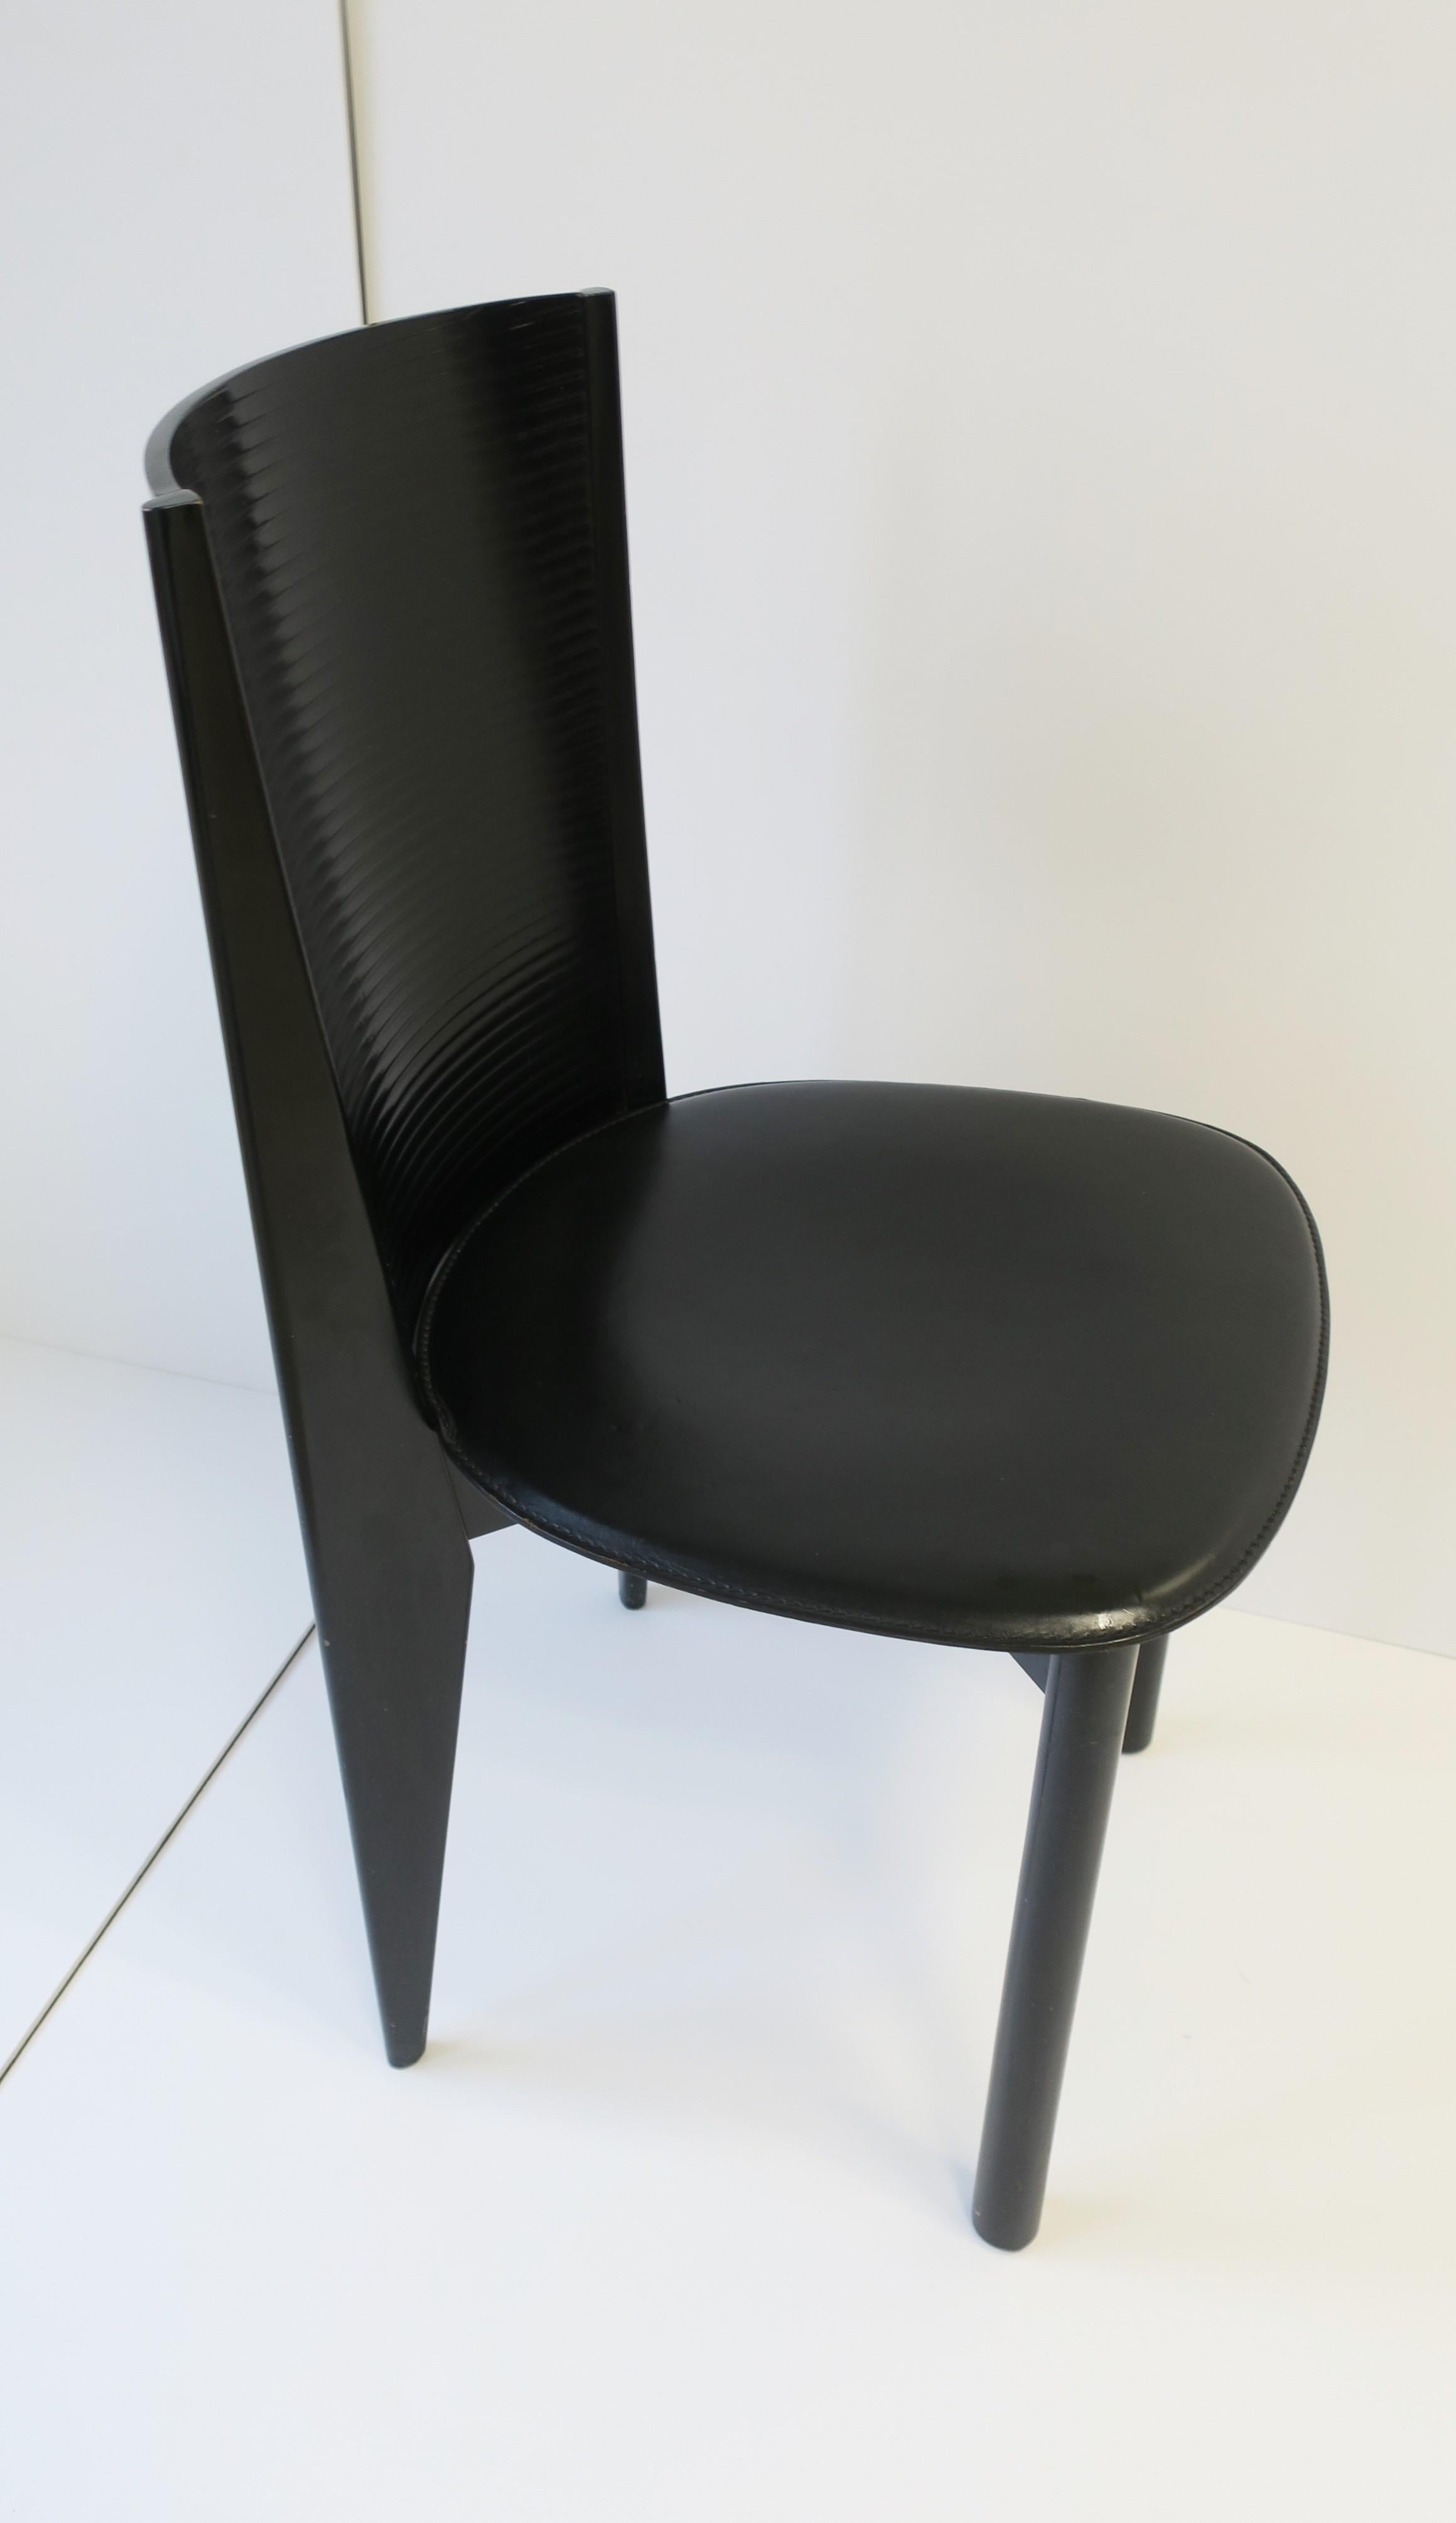 Late 20th Century Italian Designer Postmodern Black Lacquer Wood and Leather Side Chair  For Sale